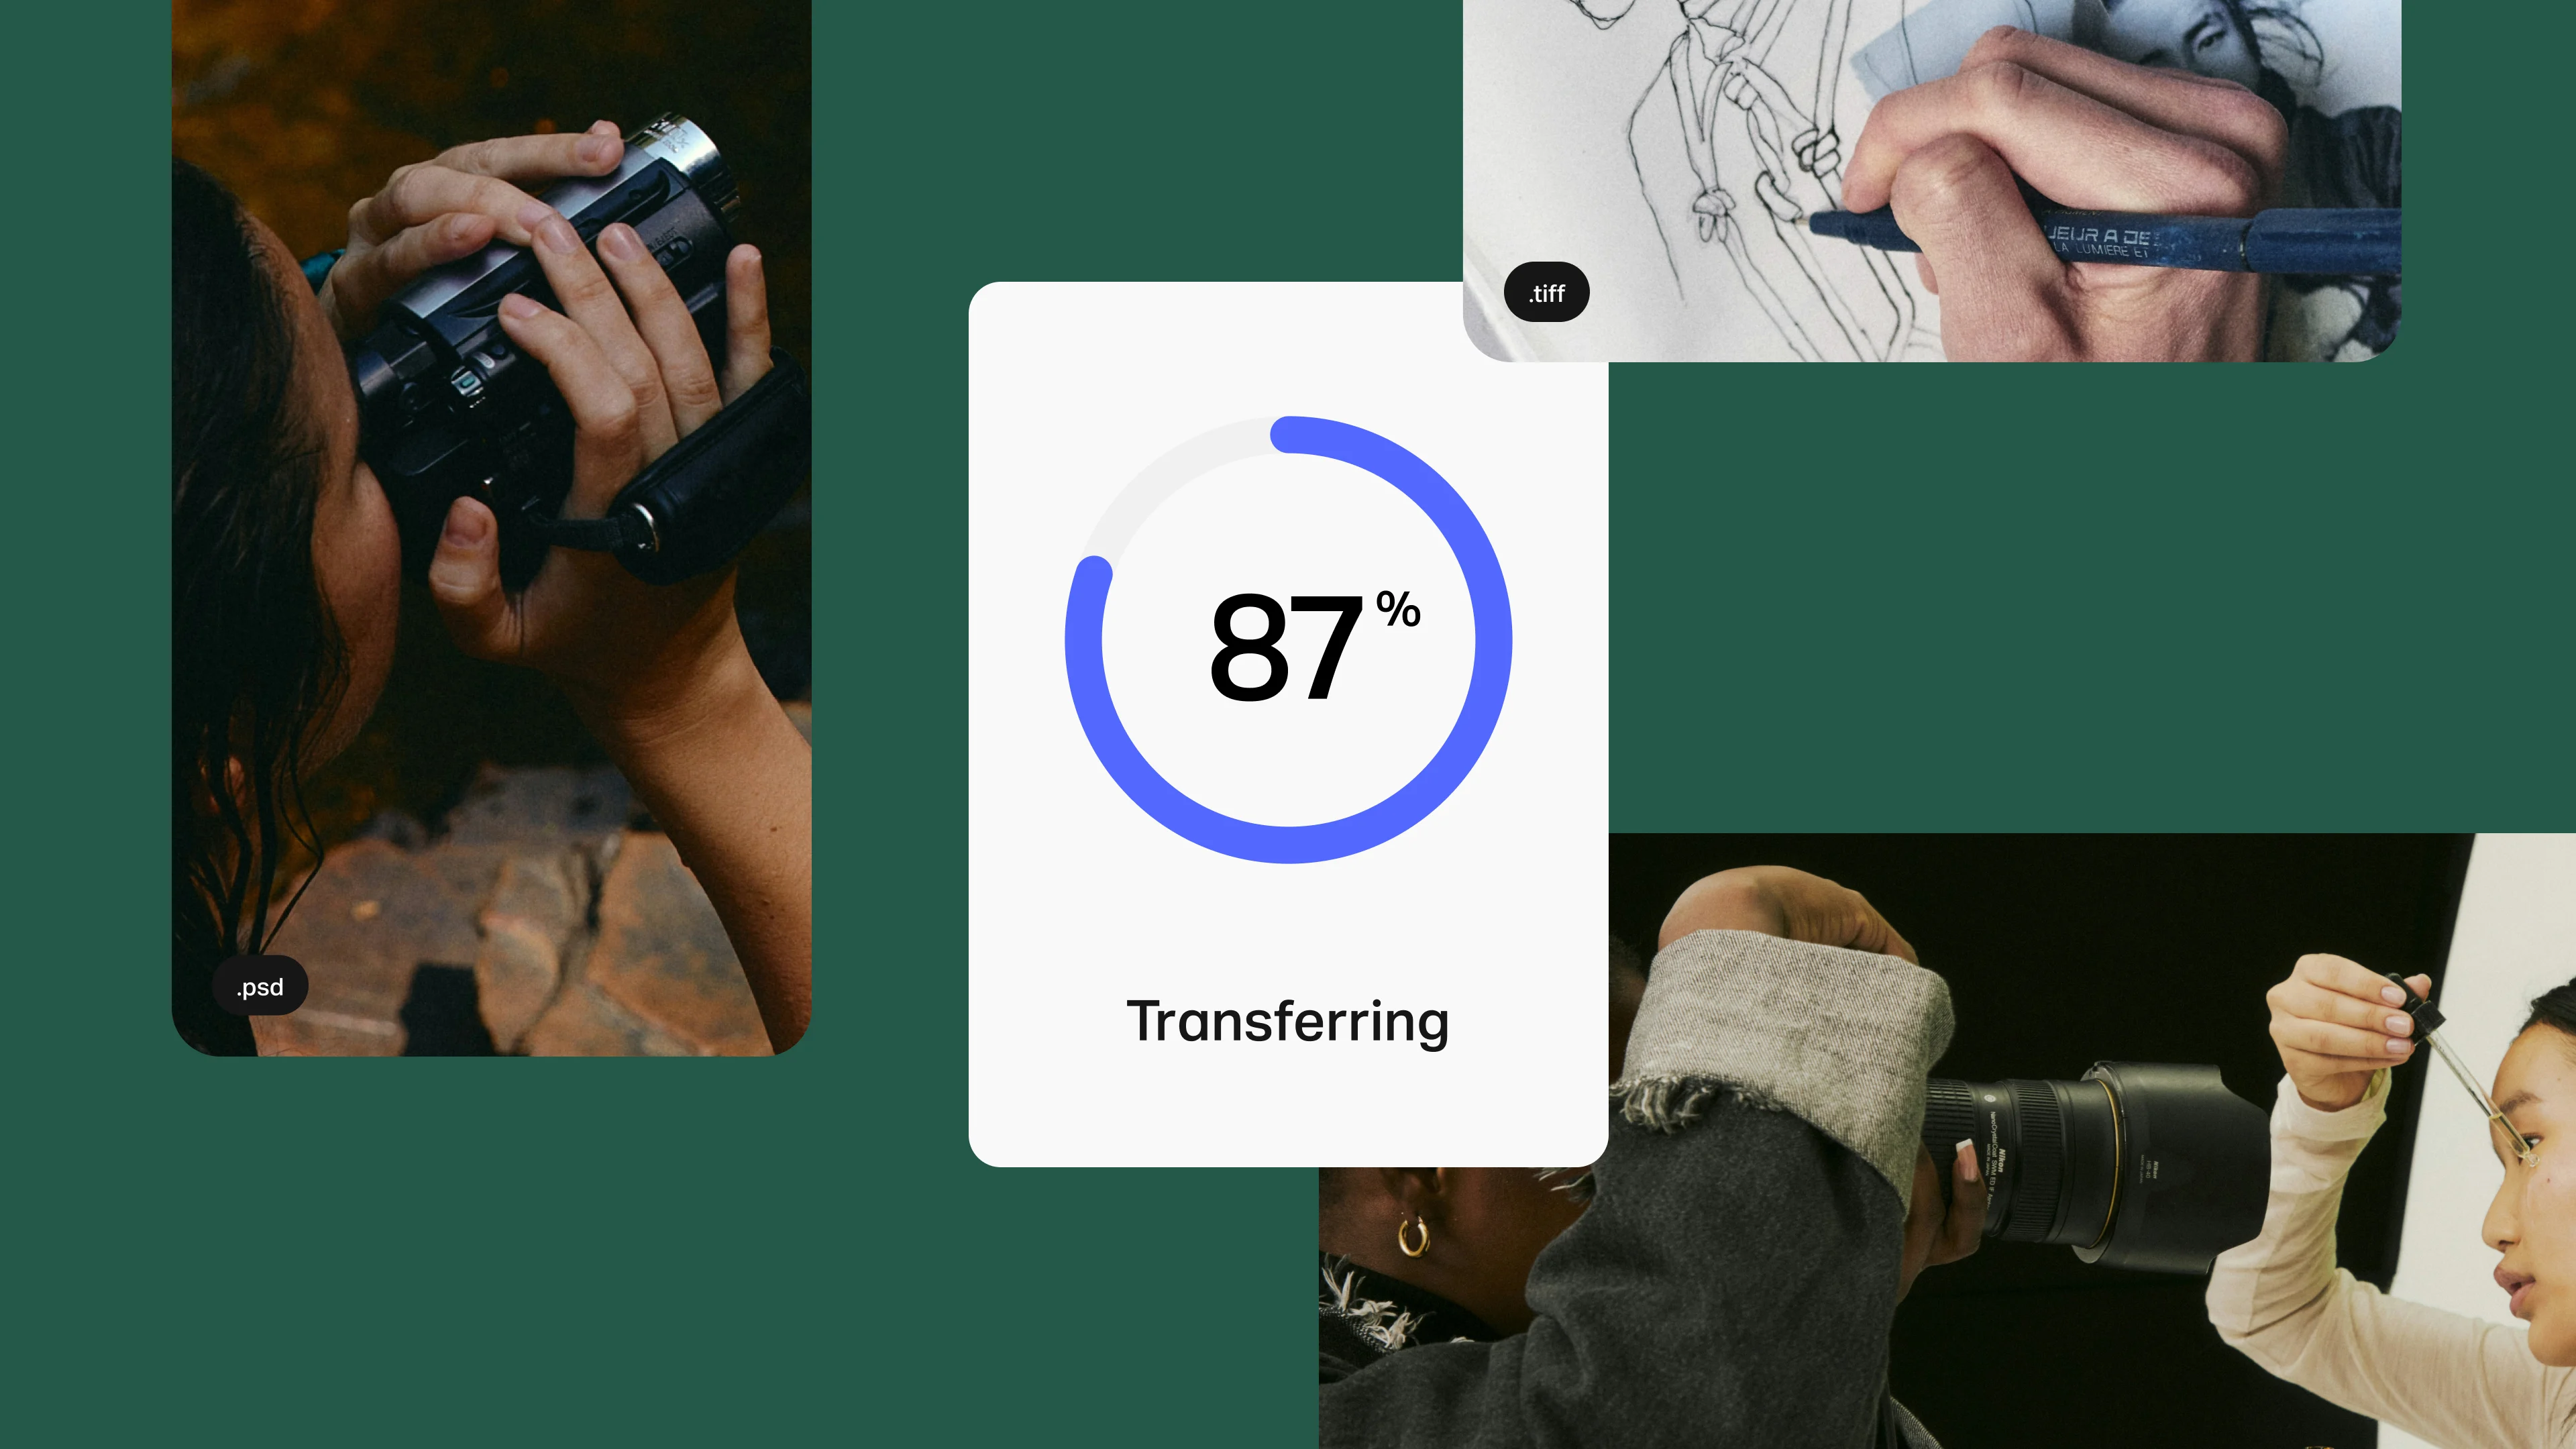 WeTransfer Product Replacement Image.jpg